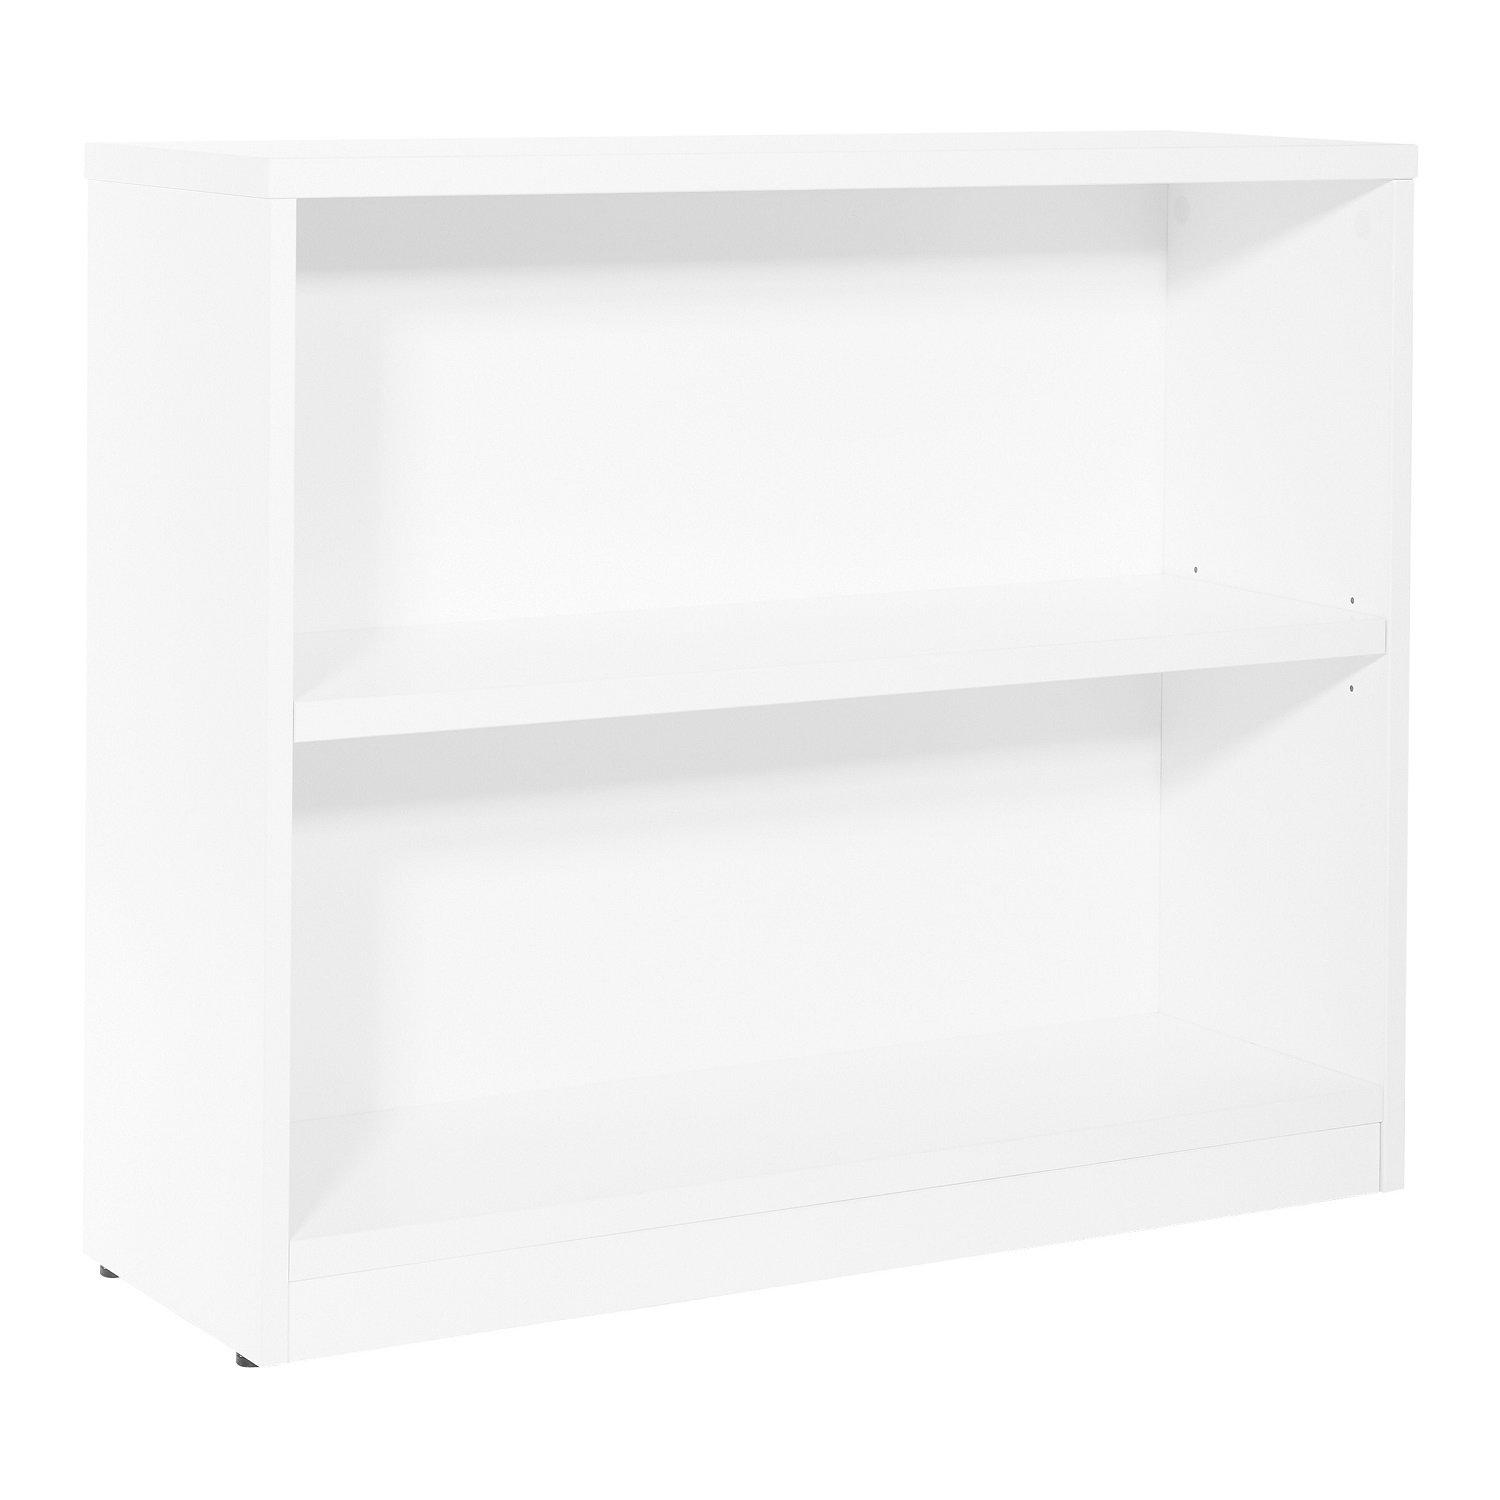 30" High 2-Shelf Laminate Bookcase with 1" Thick Shelves